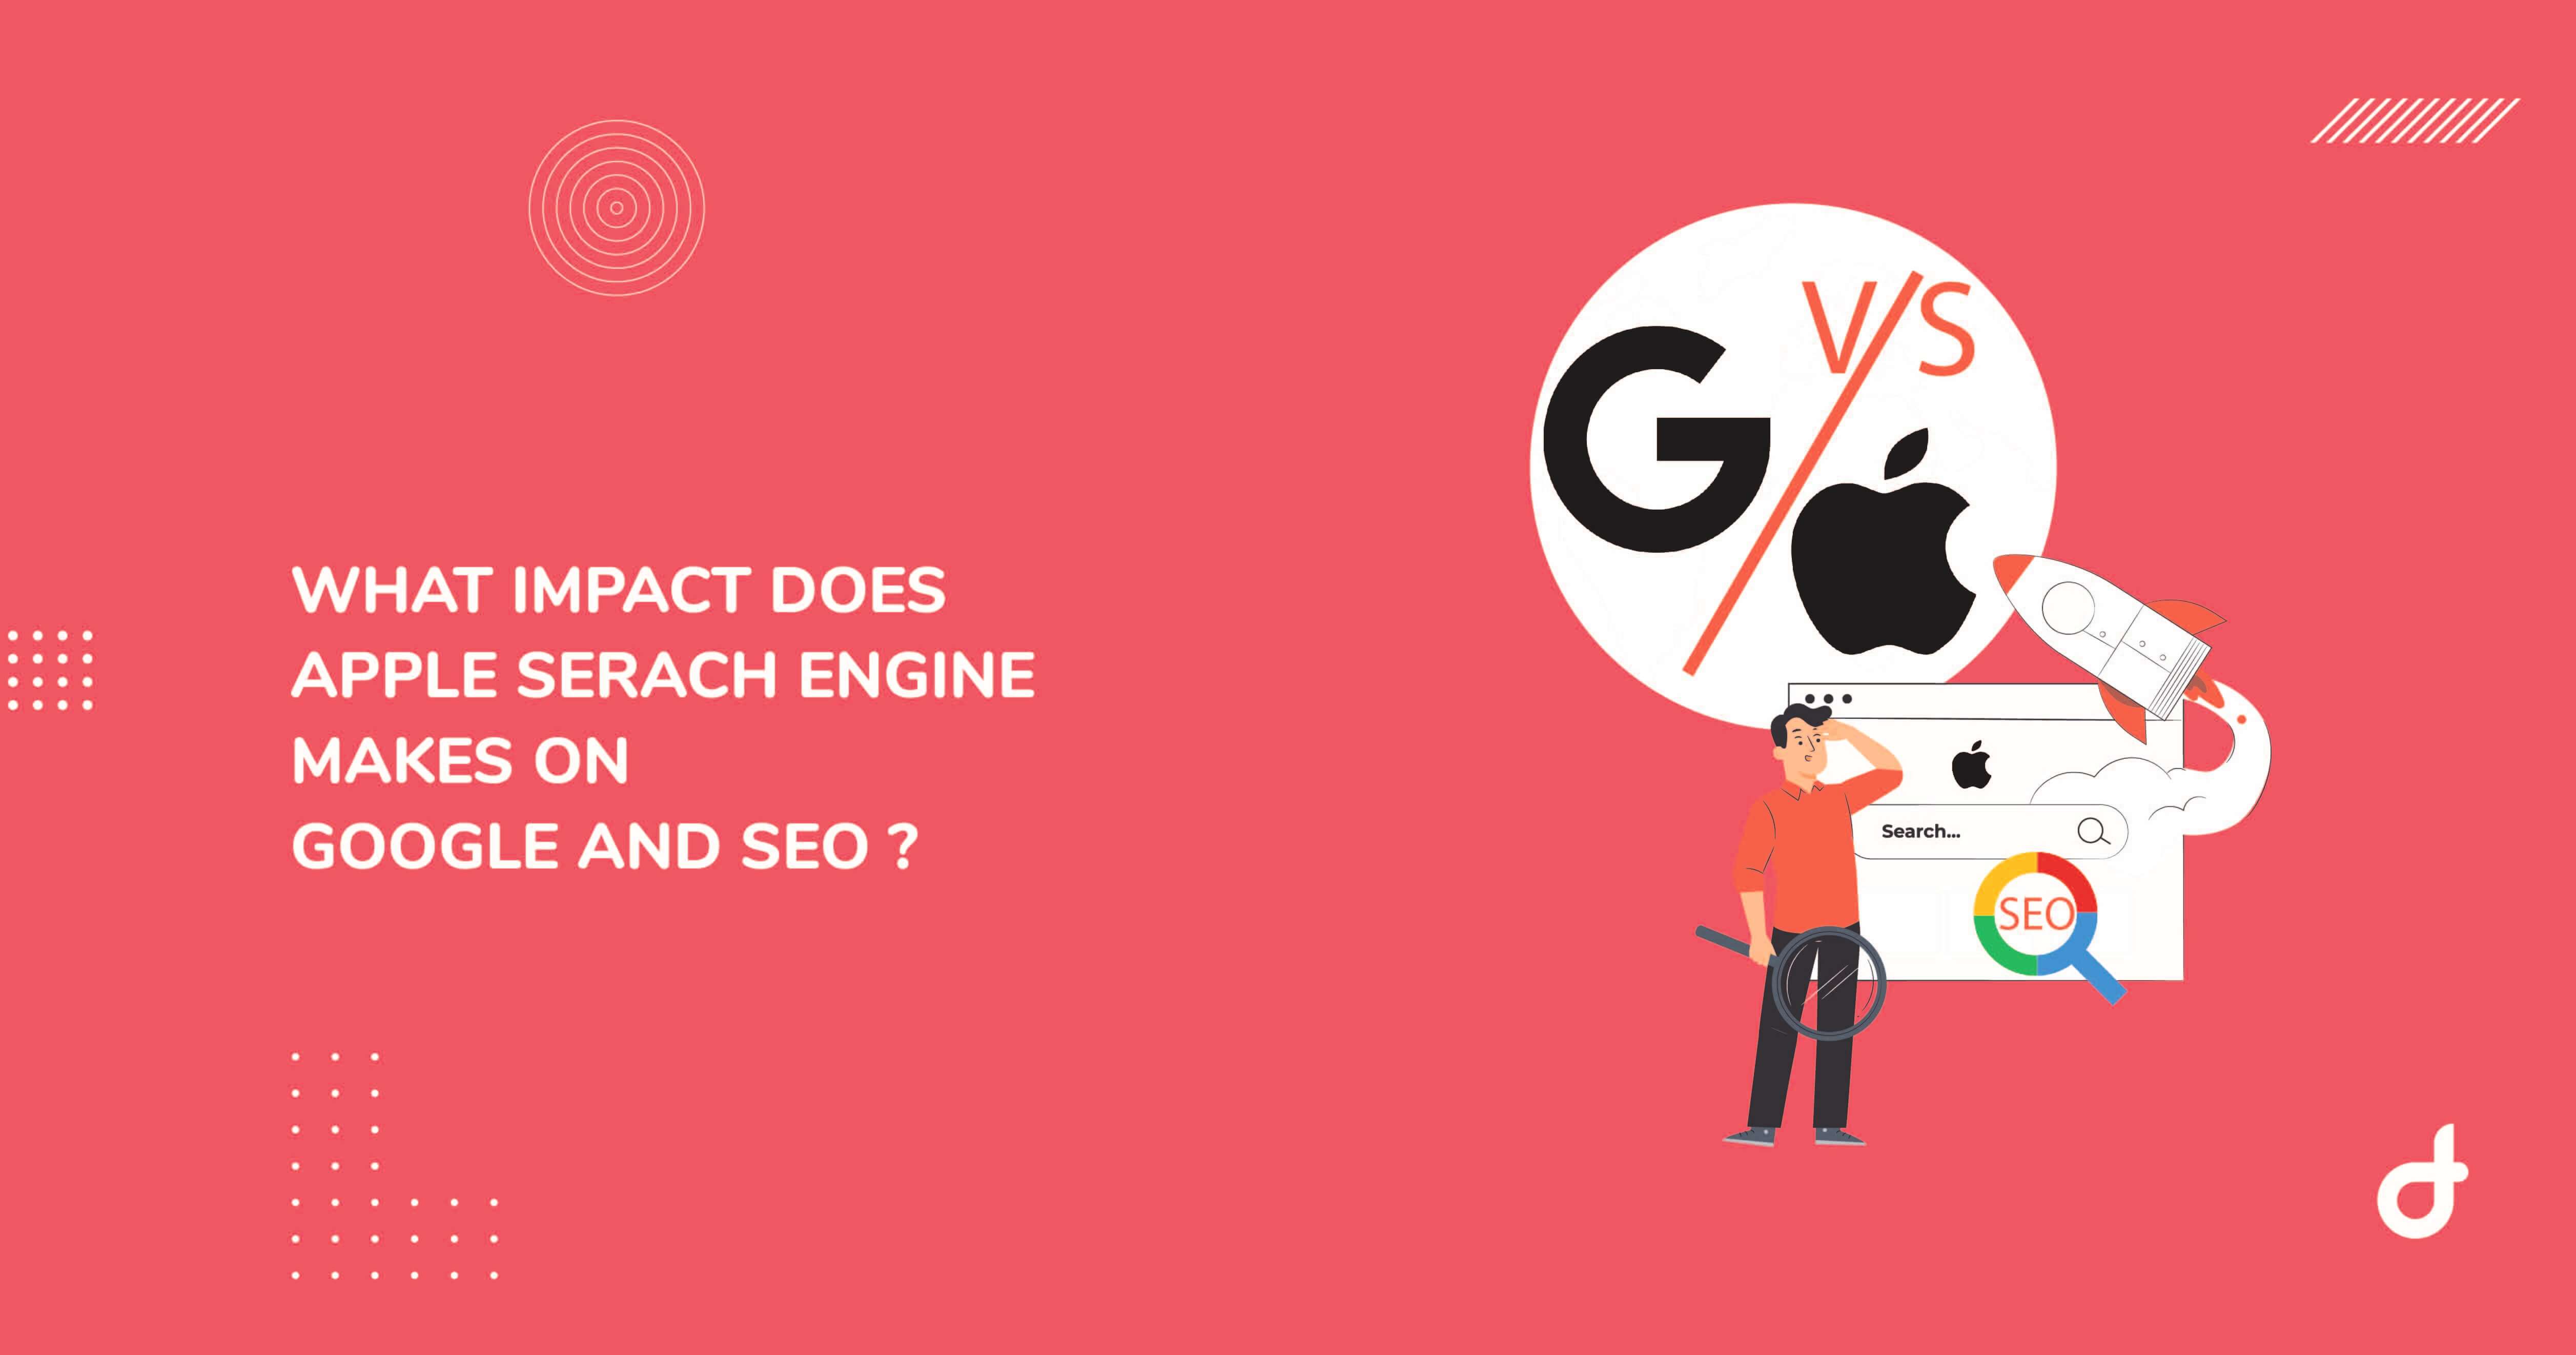 What Impact Does Apple Search Engine Make on Google and SEO?